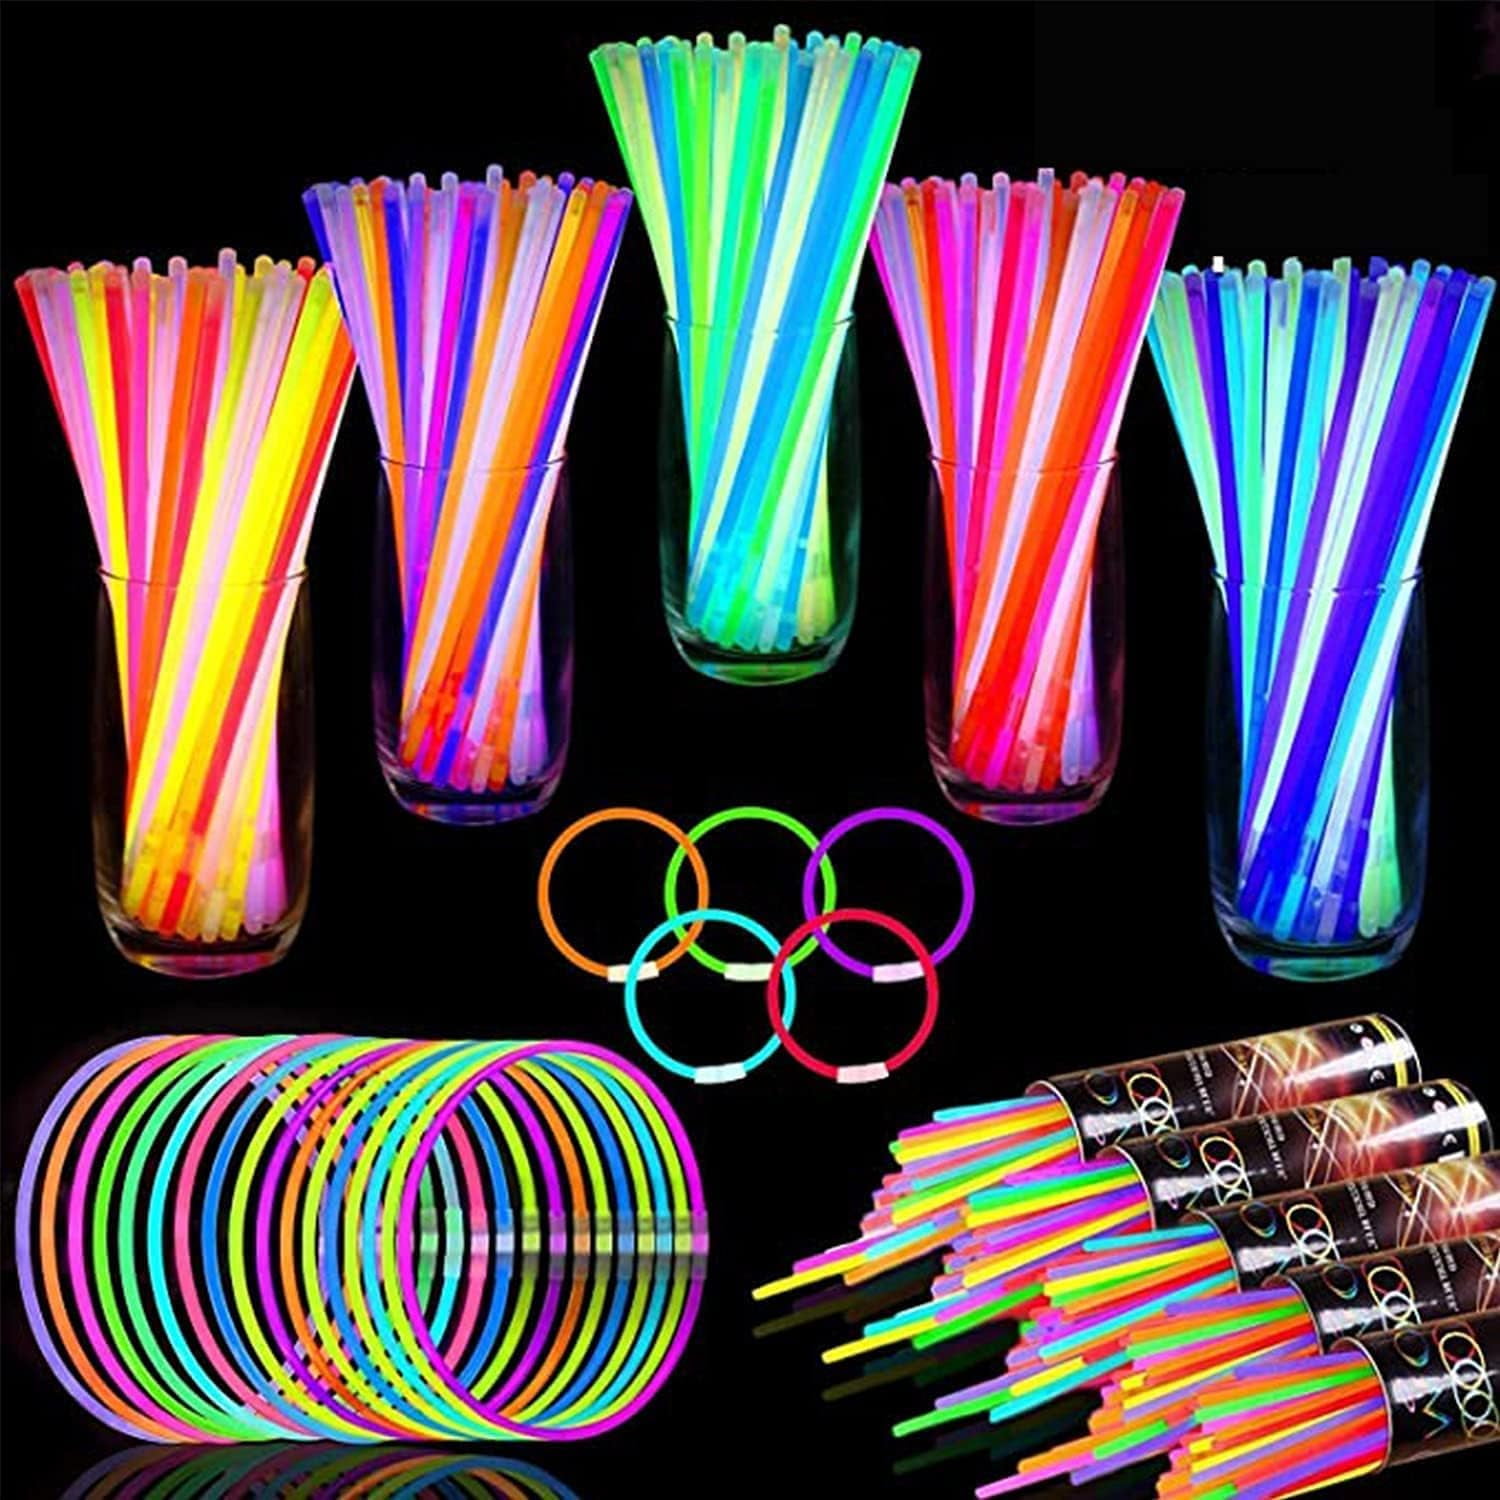 Trimming Shop Glow Sticks Connector to Create Neon Necklace Glowing Wrist Band Bracelets Headbands Goggles for Kids Party Supplies, Decoration